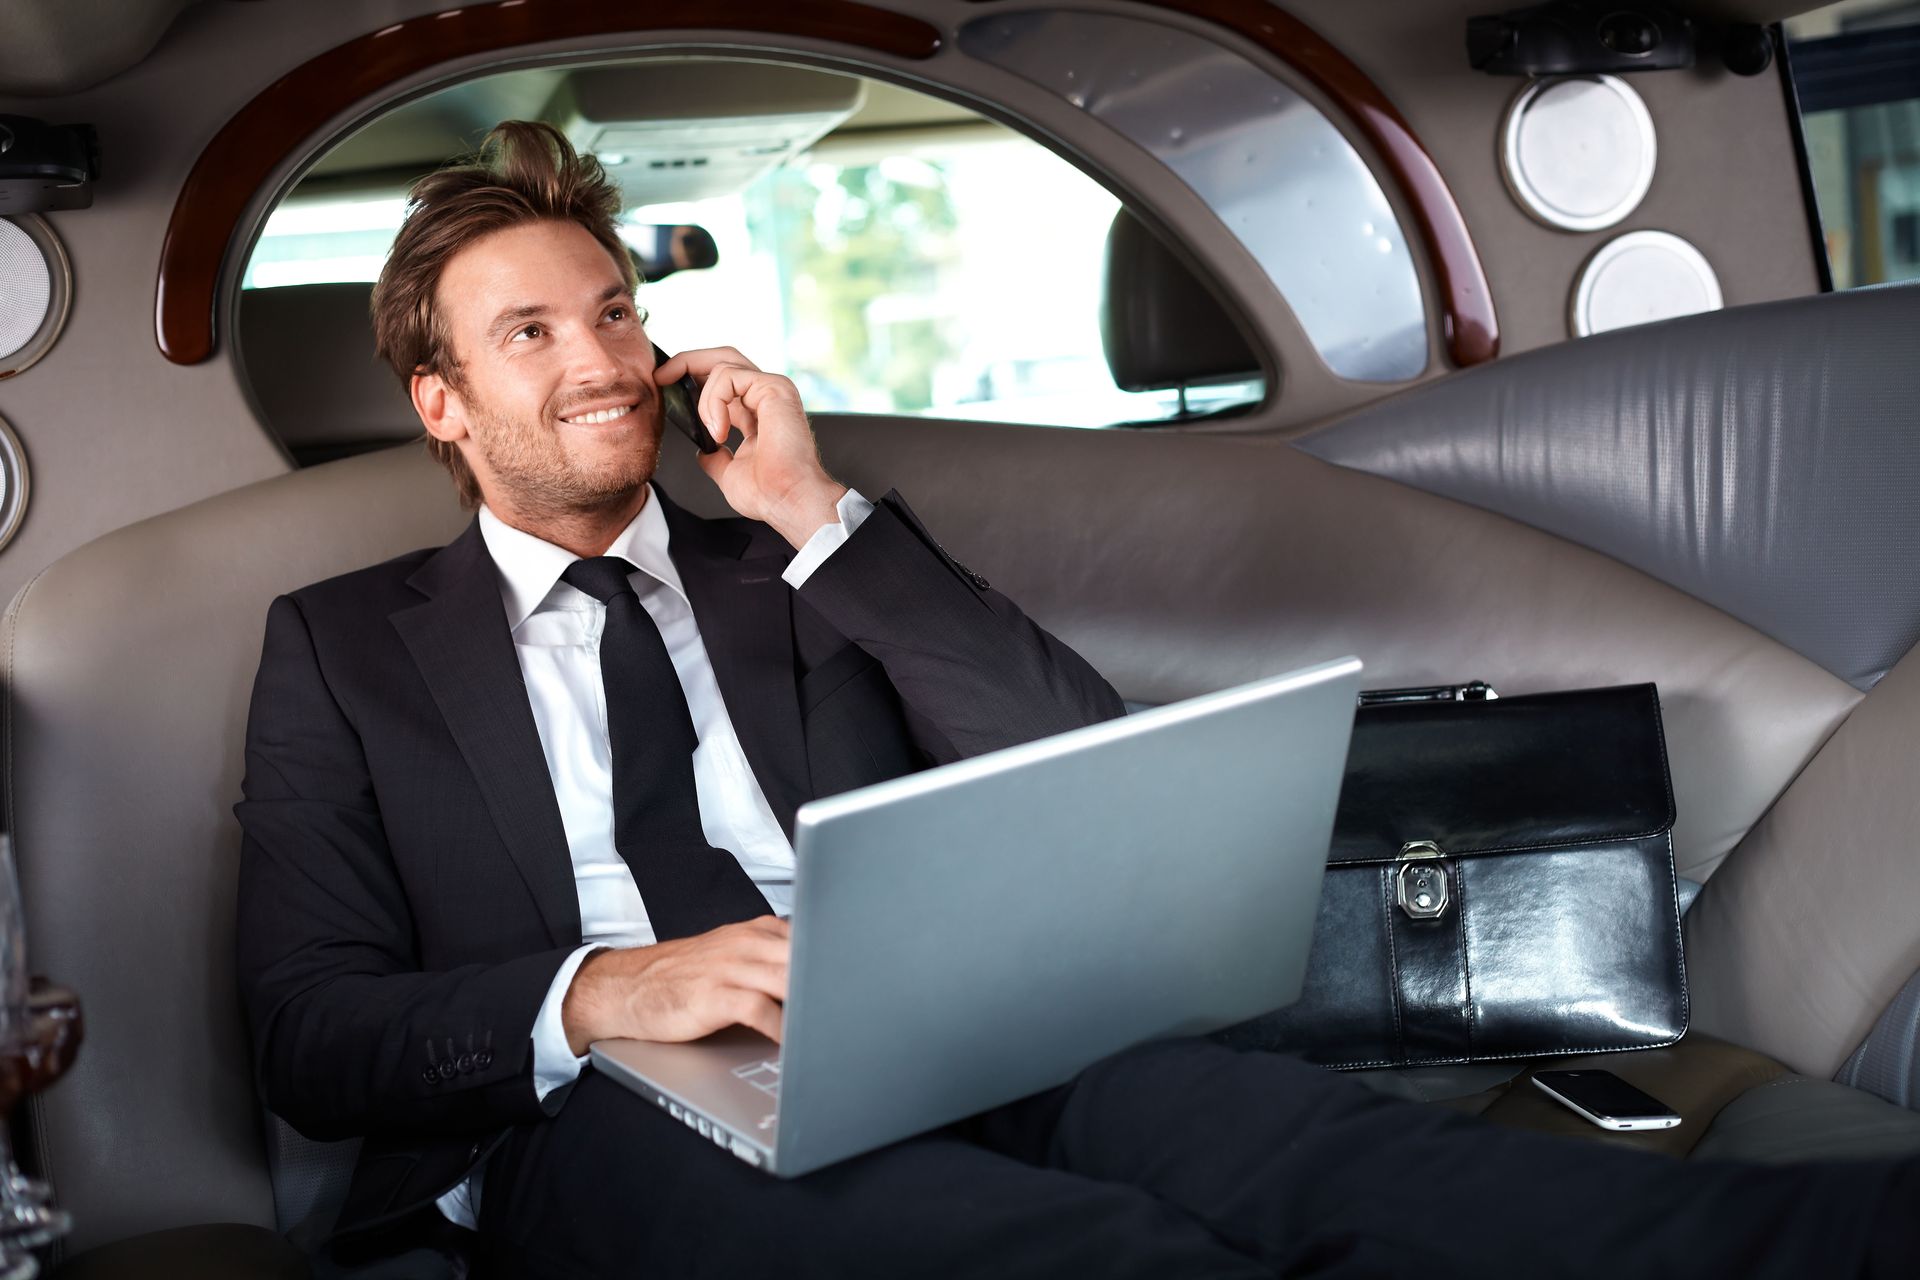 A man in a stylish suit sits comfortably inside Rockford Rides limousine, holding a laptop.